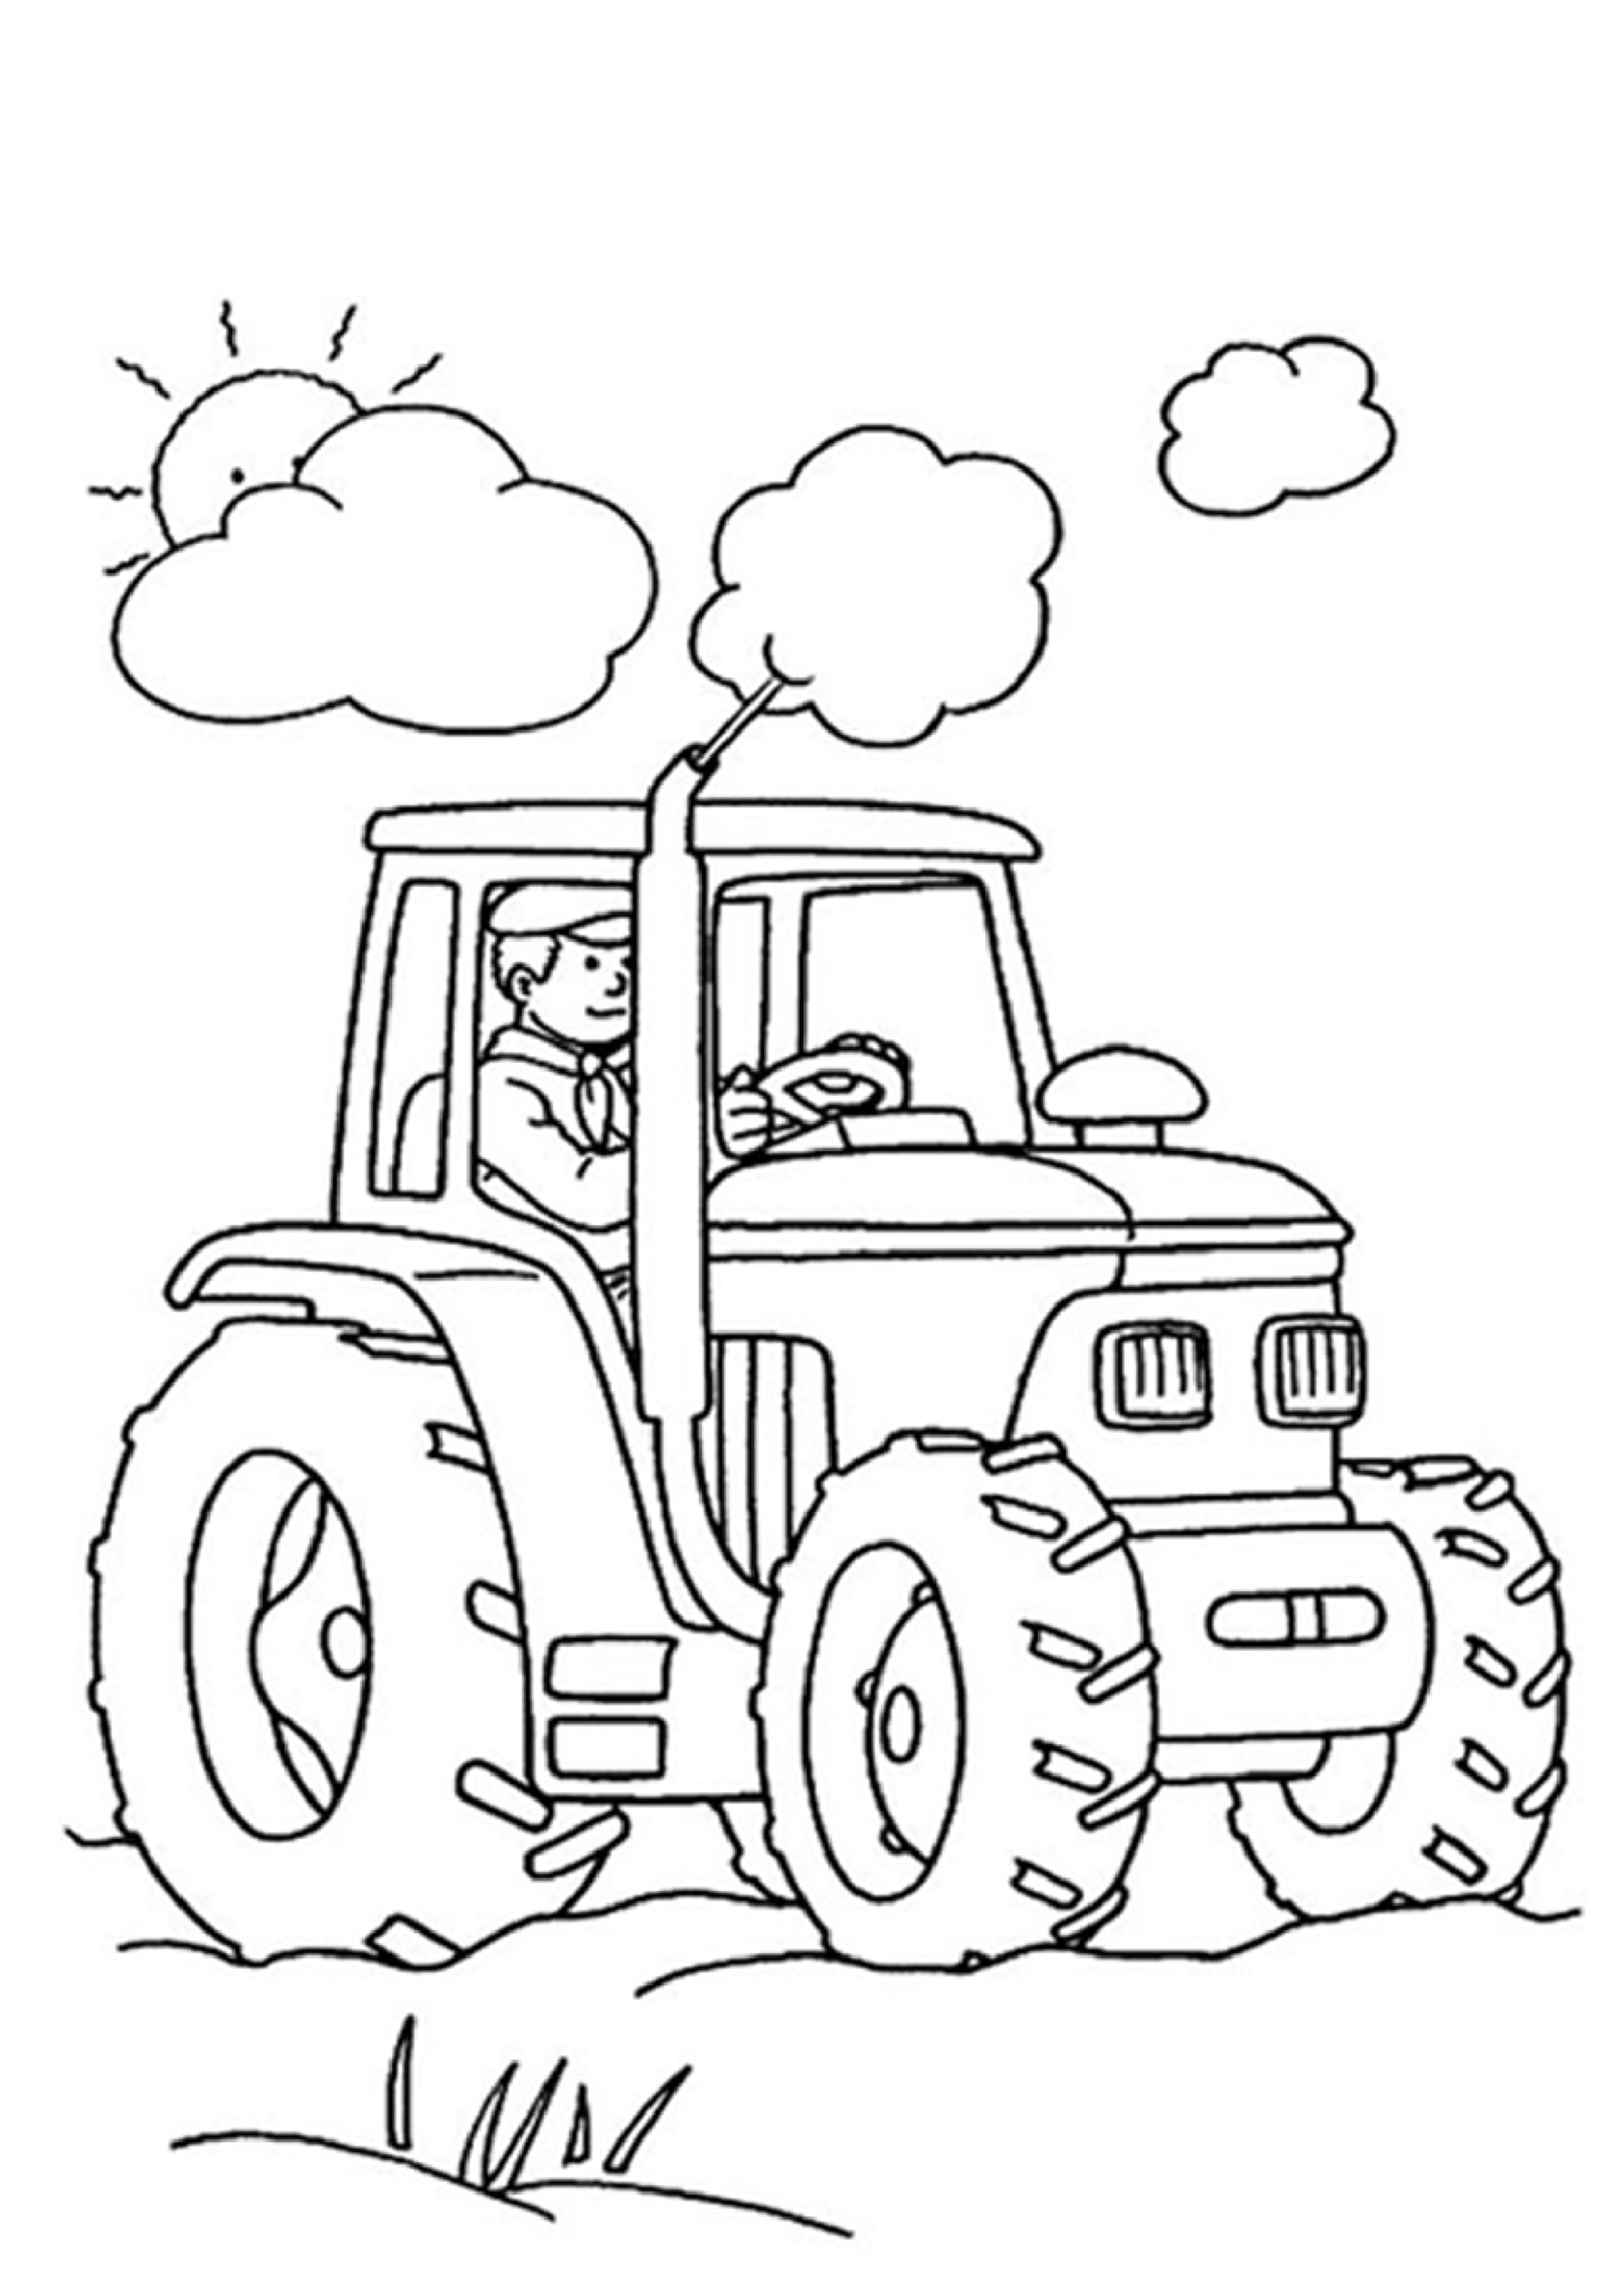 Coloring Sheets For Boys Online
 Top 25 Free Printable Tractor Coloring Pages line